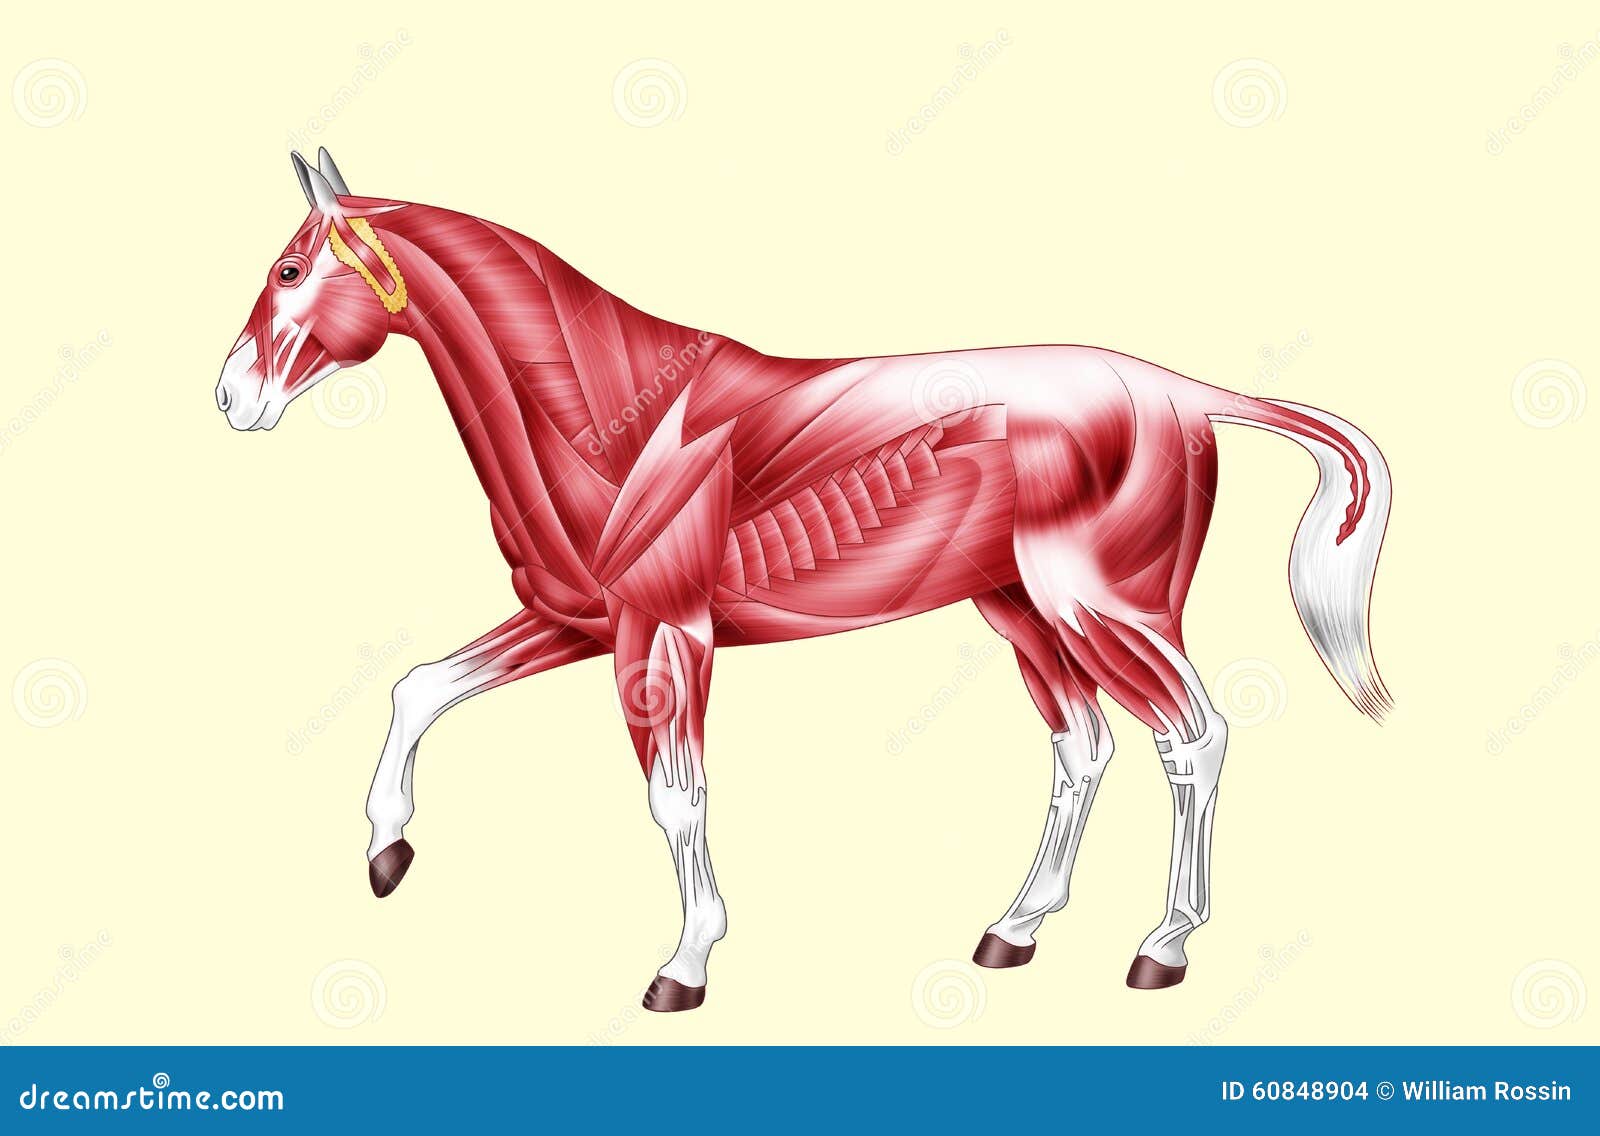 horse anatomy - muscles - no text